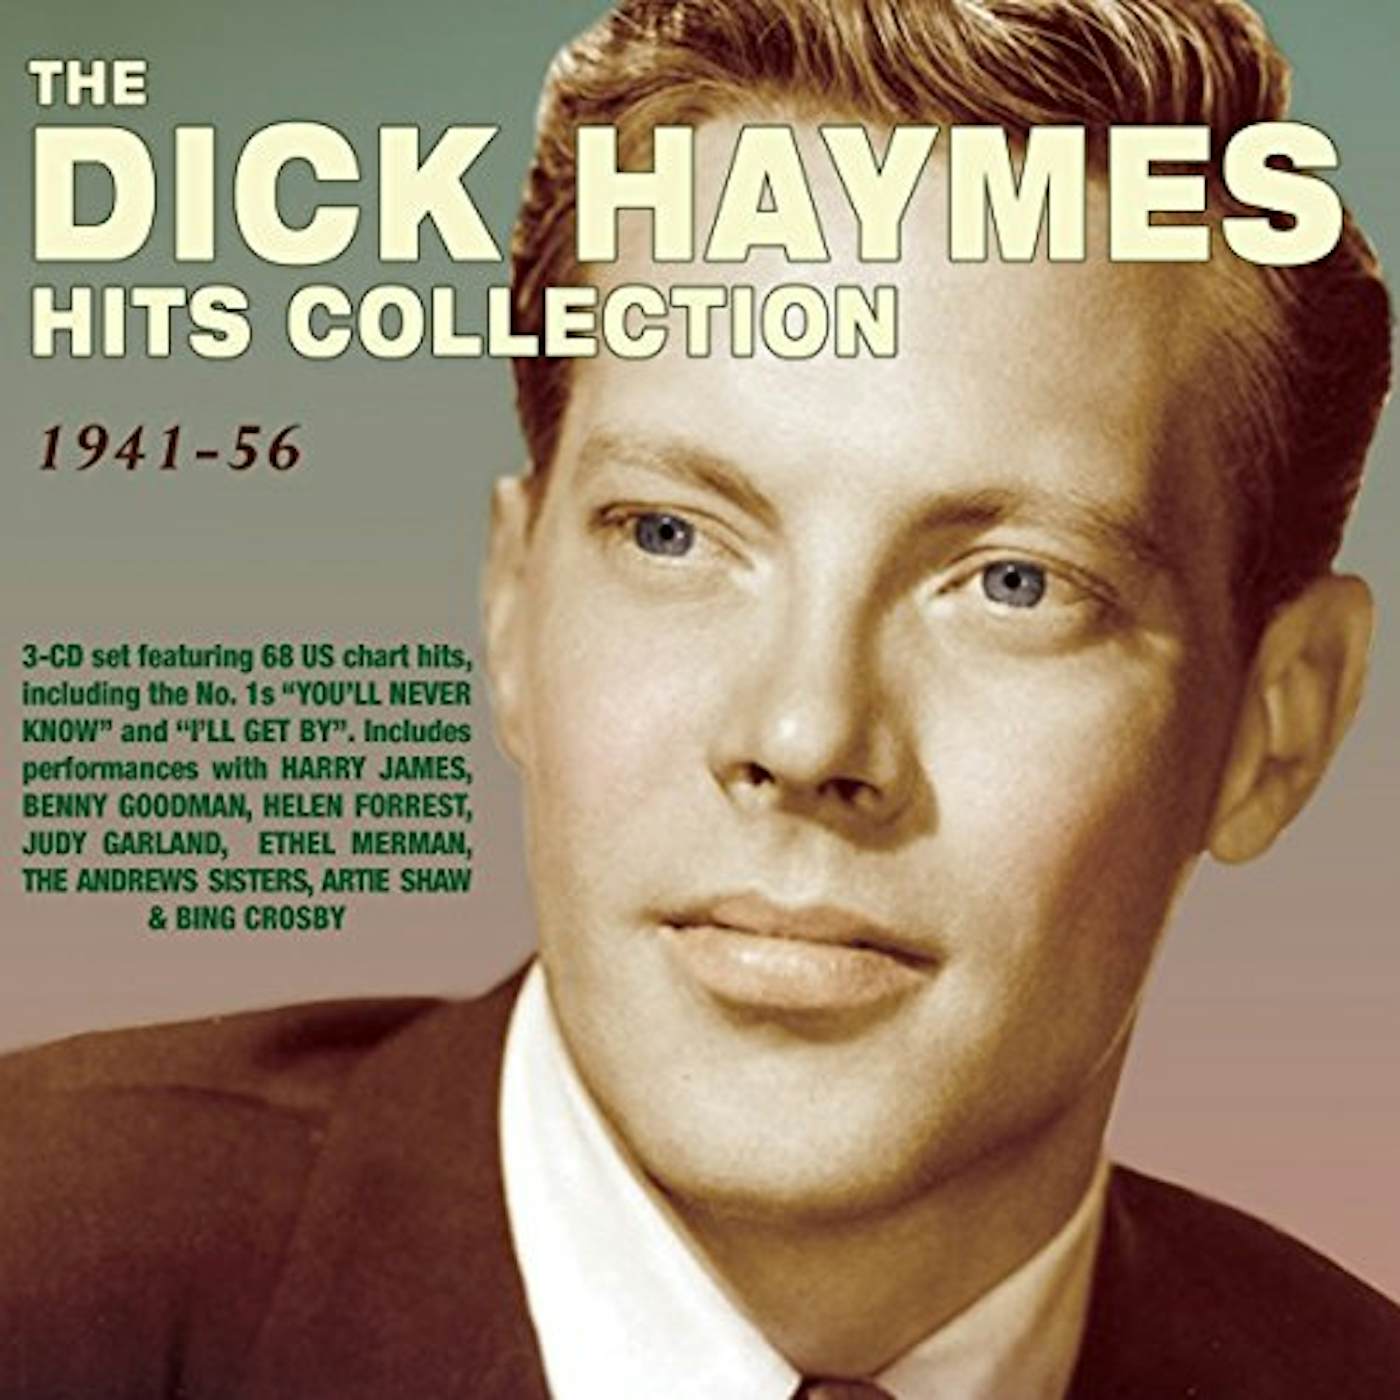 Dick Haymes HITS COLLECTION 1941-56 CD